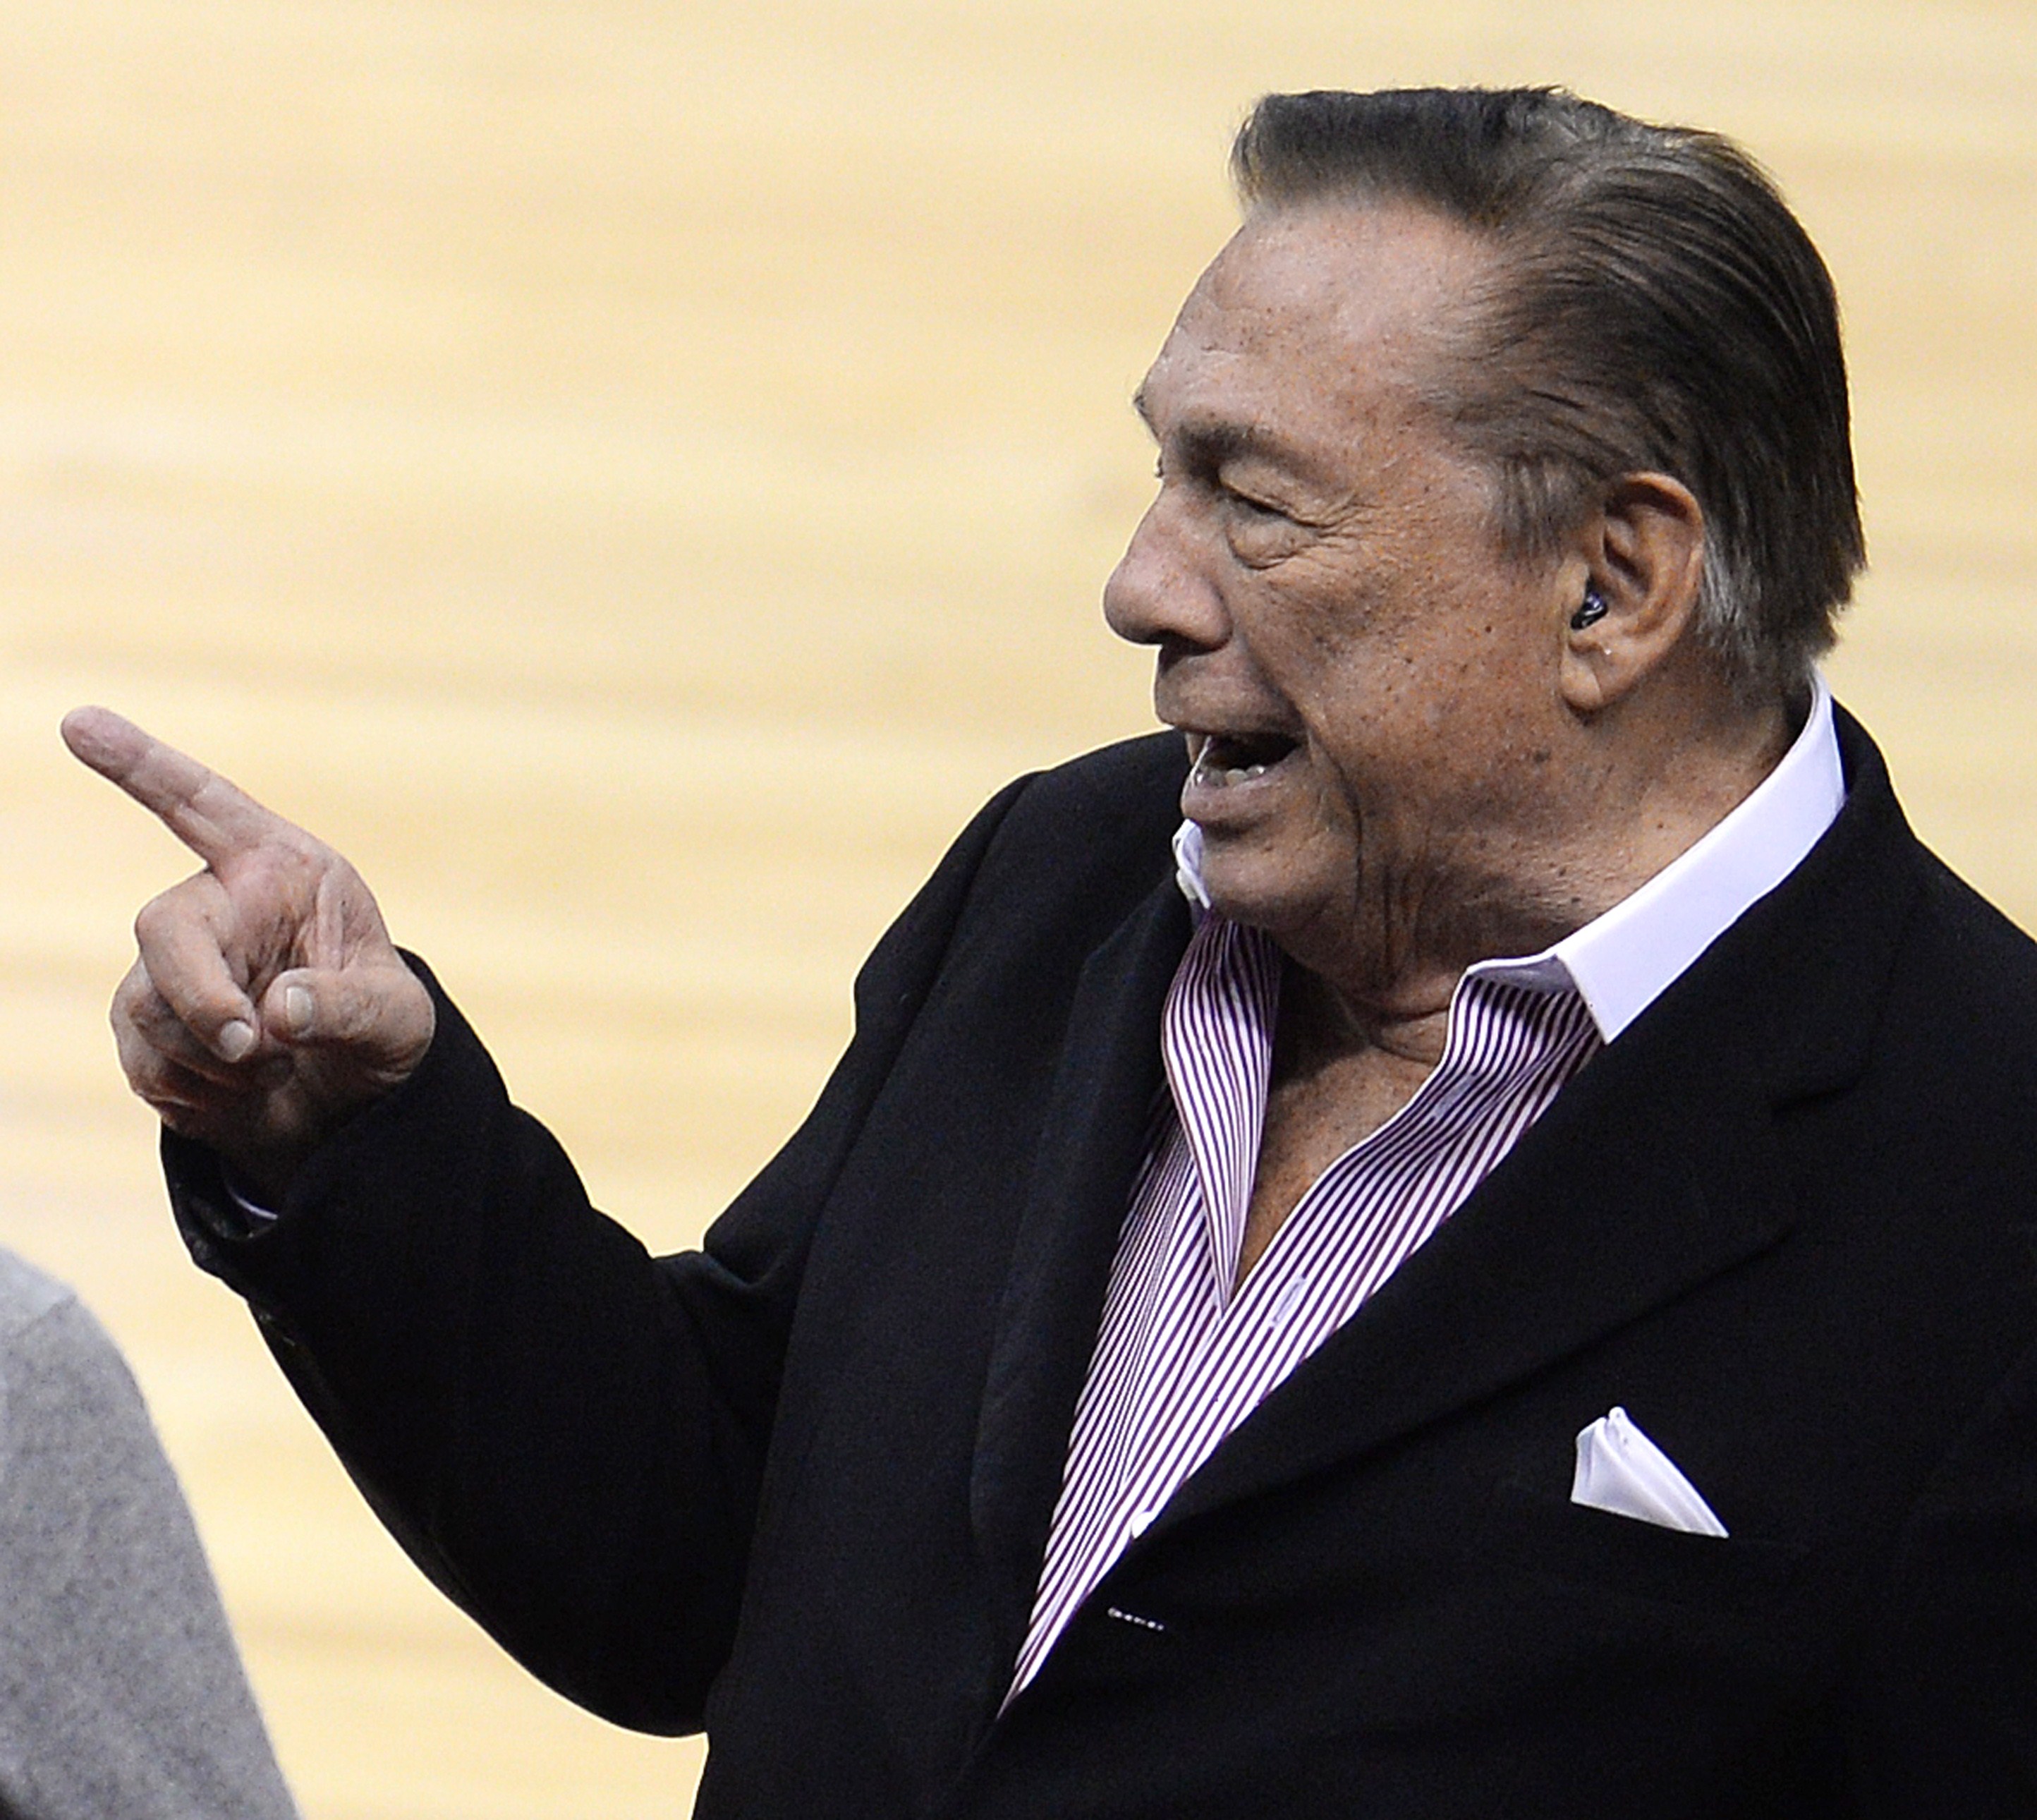 Donald Sterling speaking—never a good idea